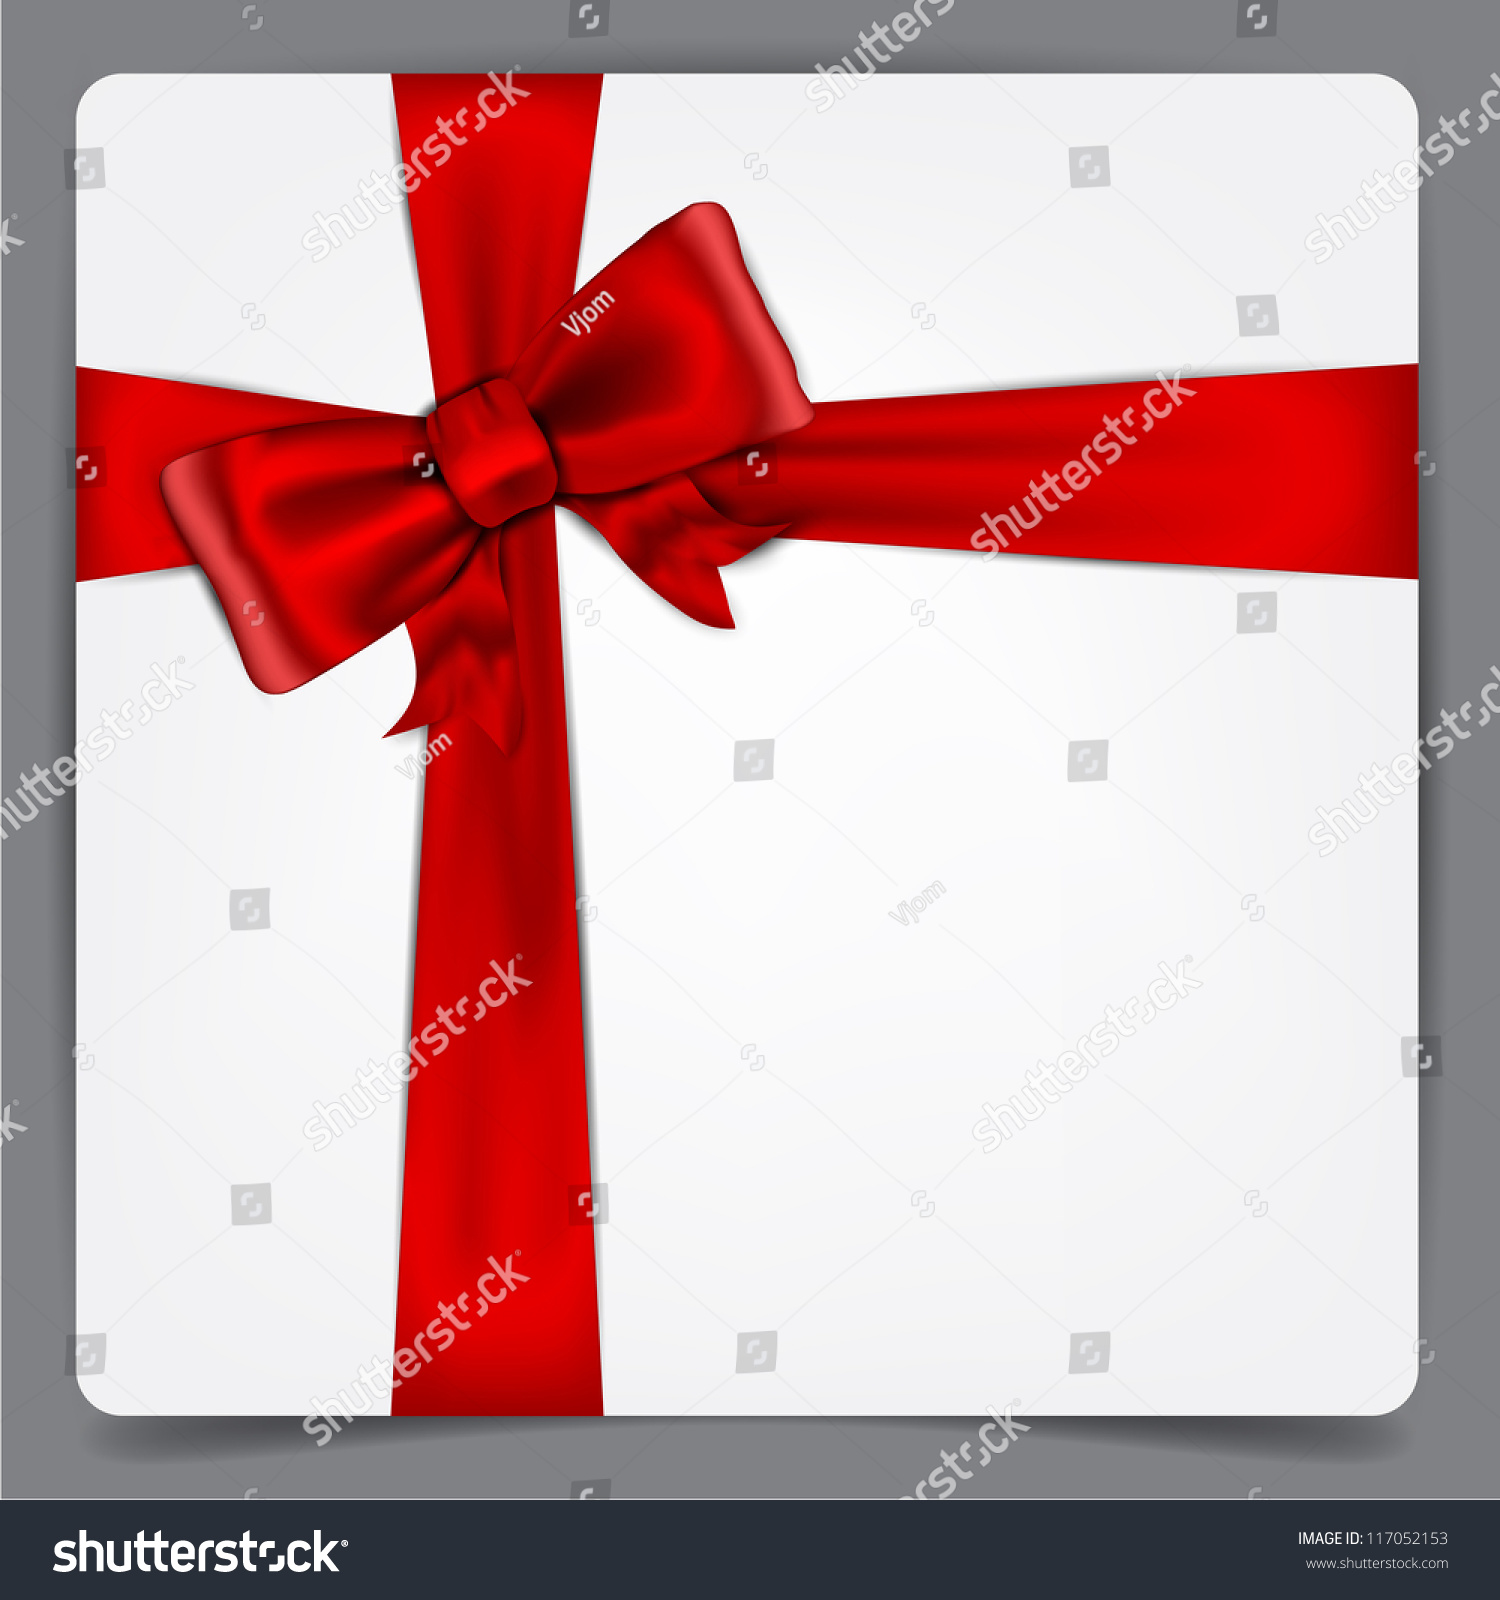 Blank Paper Background Red Bow Vector Stock Vector (Royalty Free ...